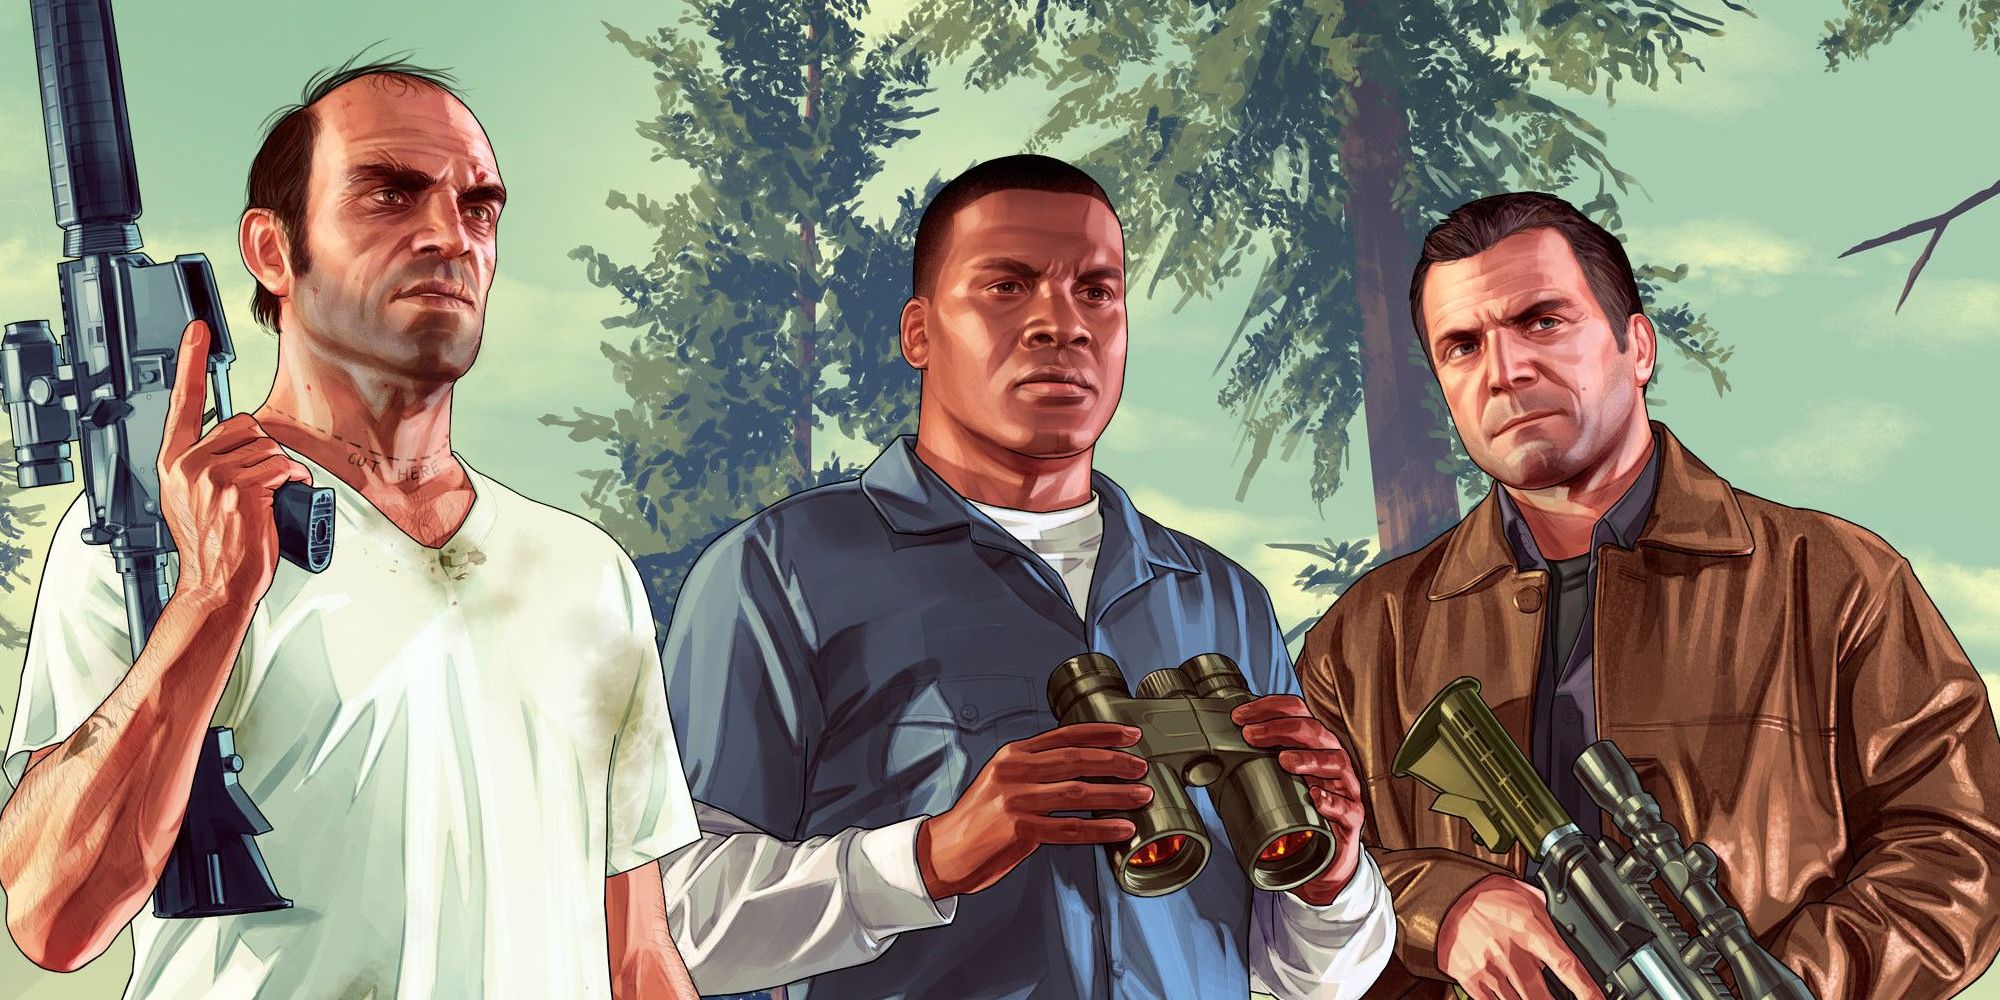 Grand Theft Auto 5's Frankin, Trevor and Michael in a forest